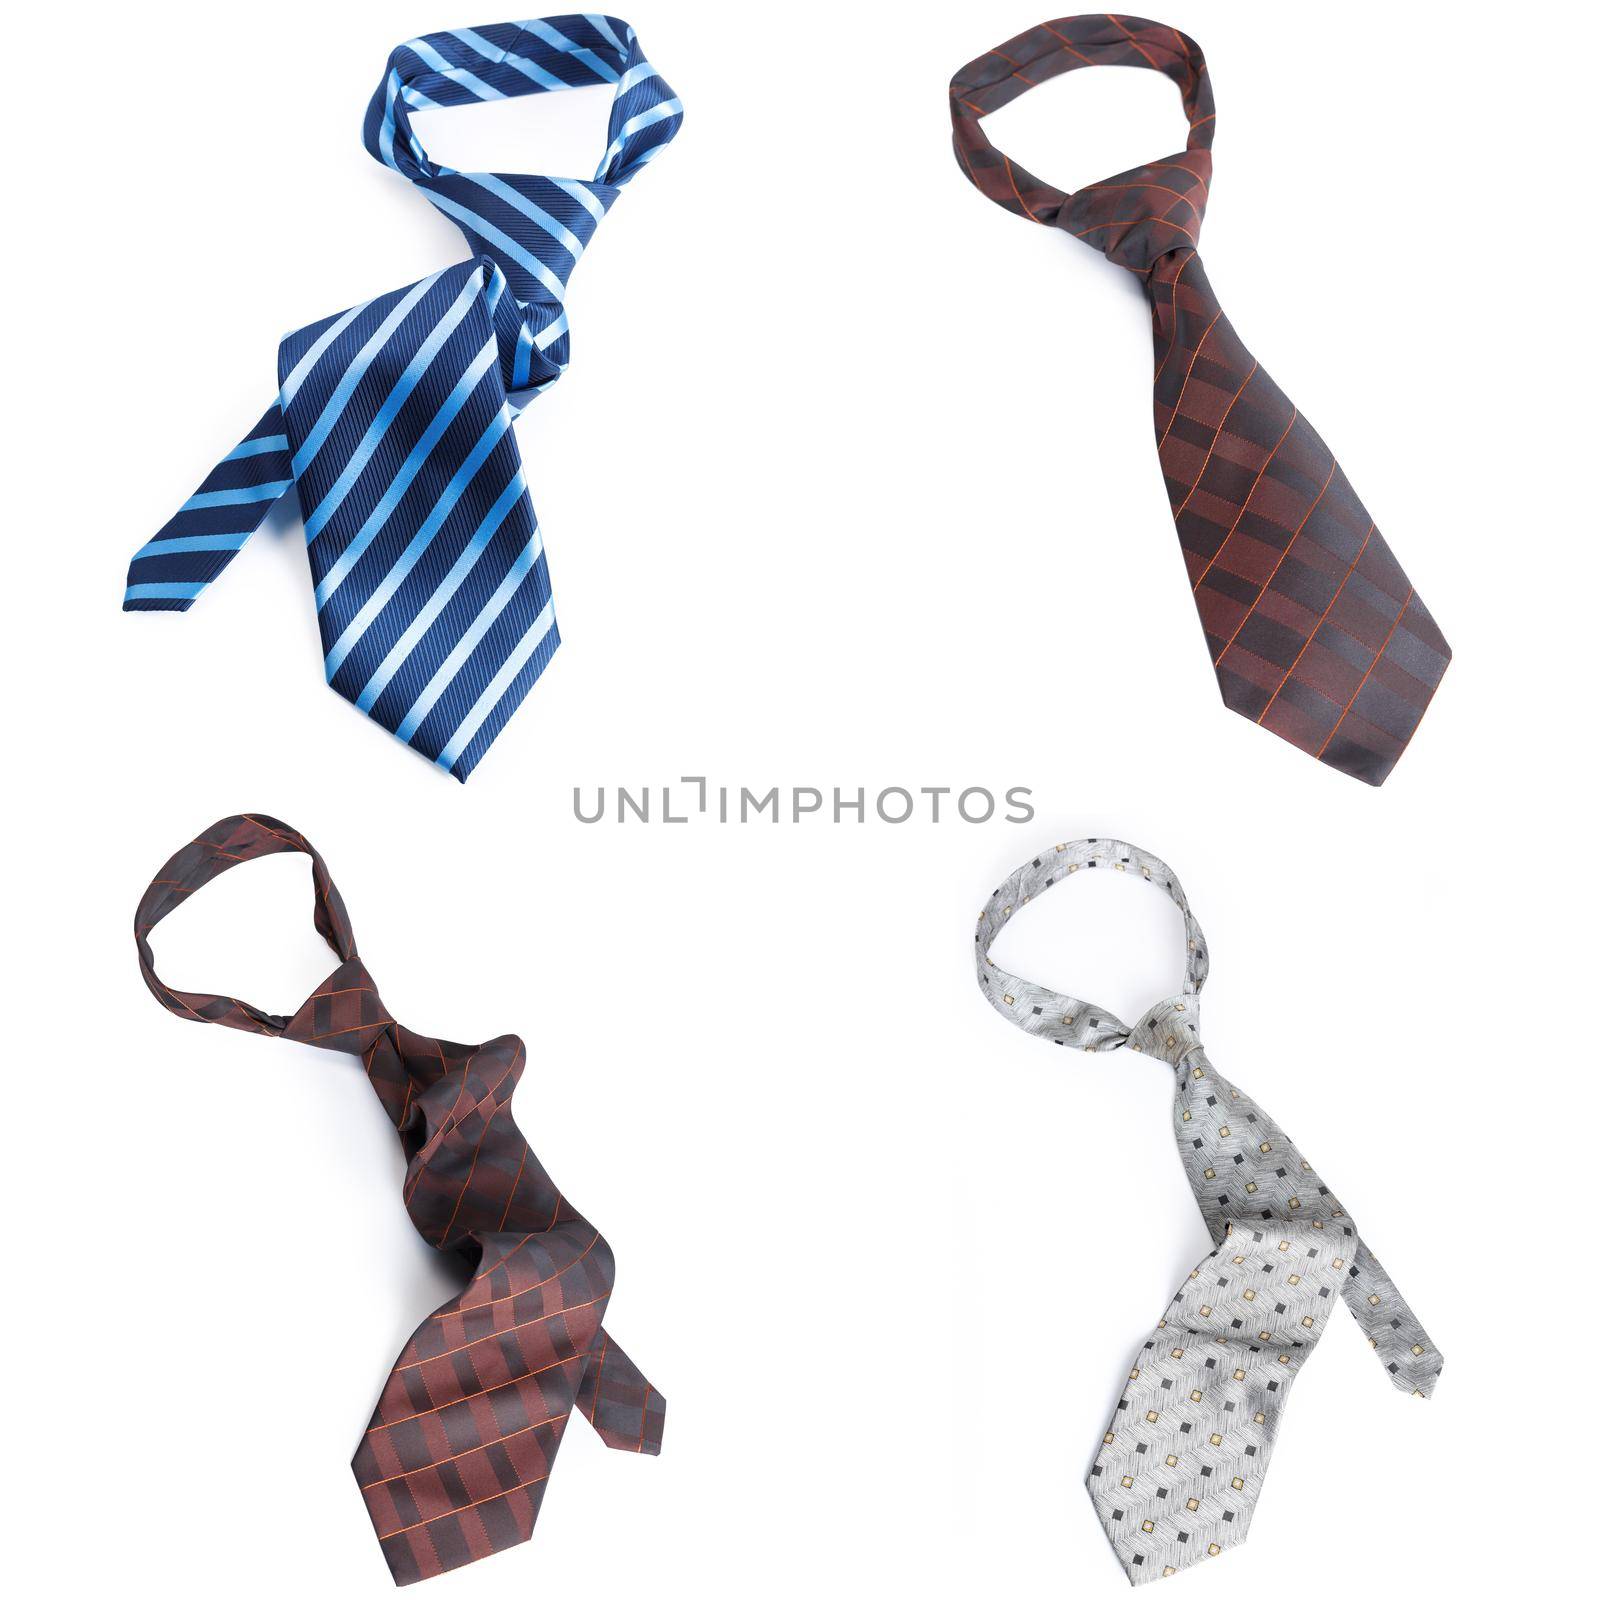 Neck ties collage isolated on white background by Fabrikasimf